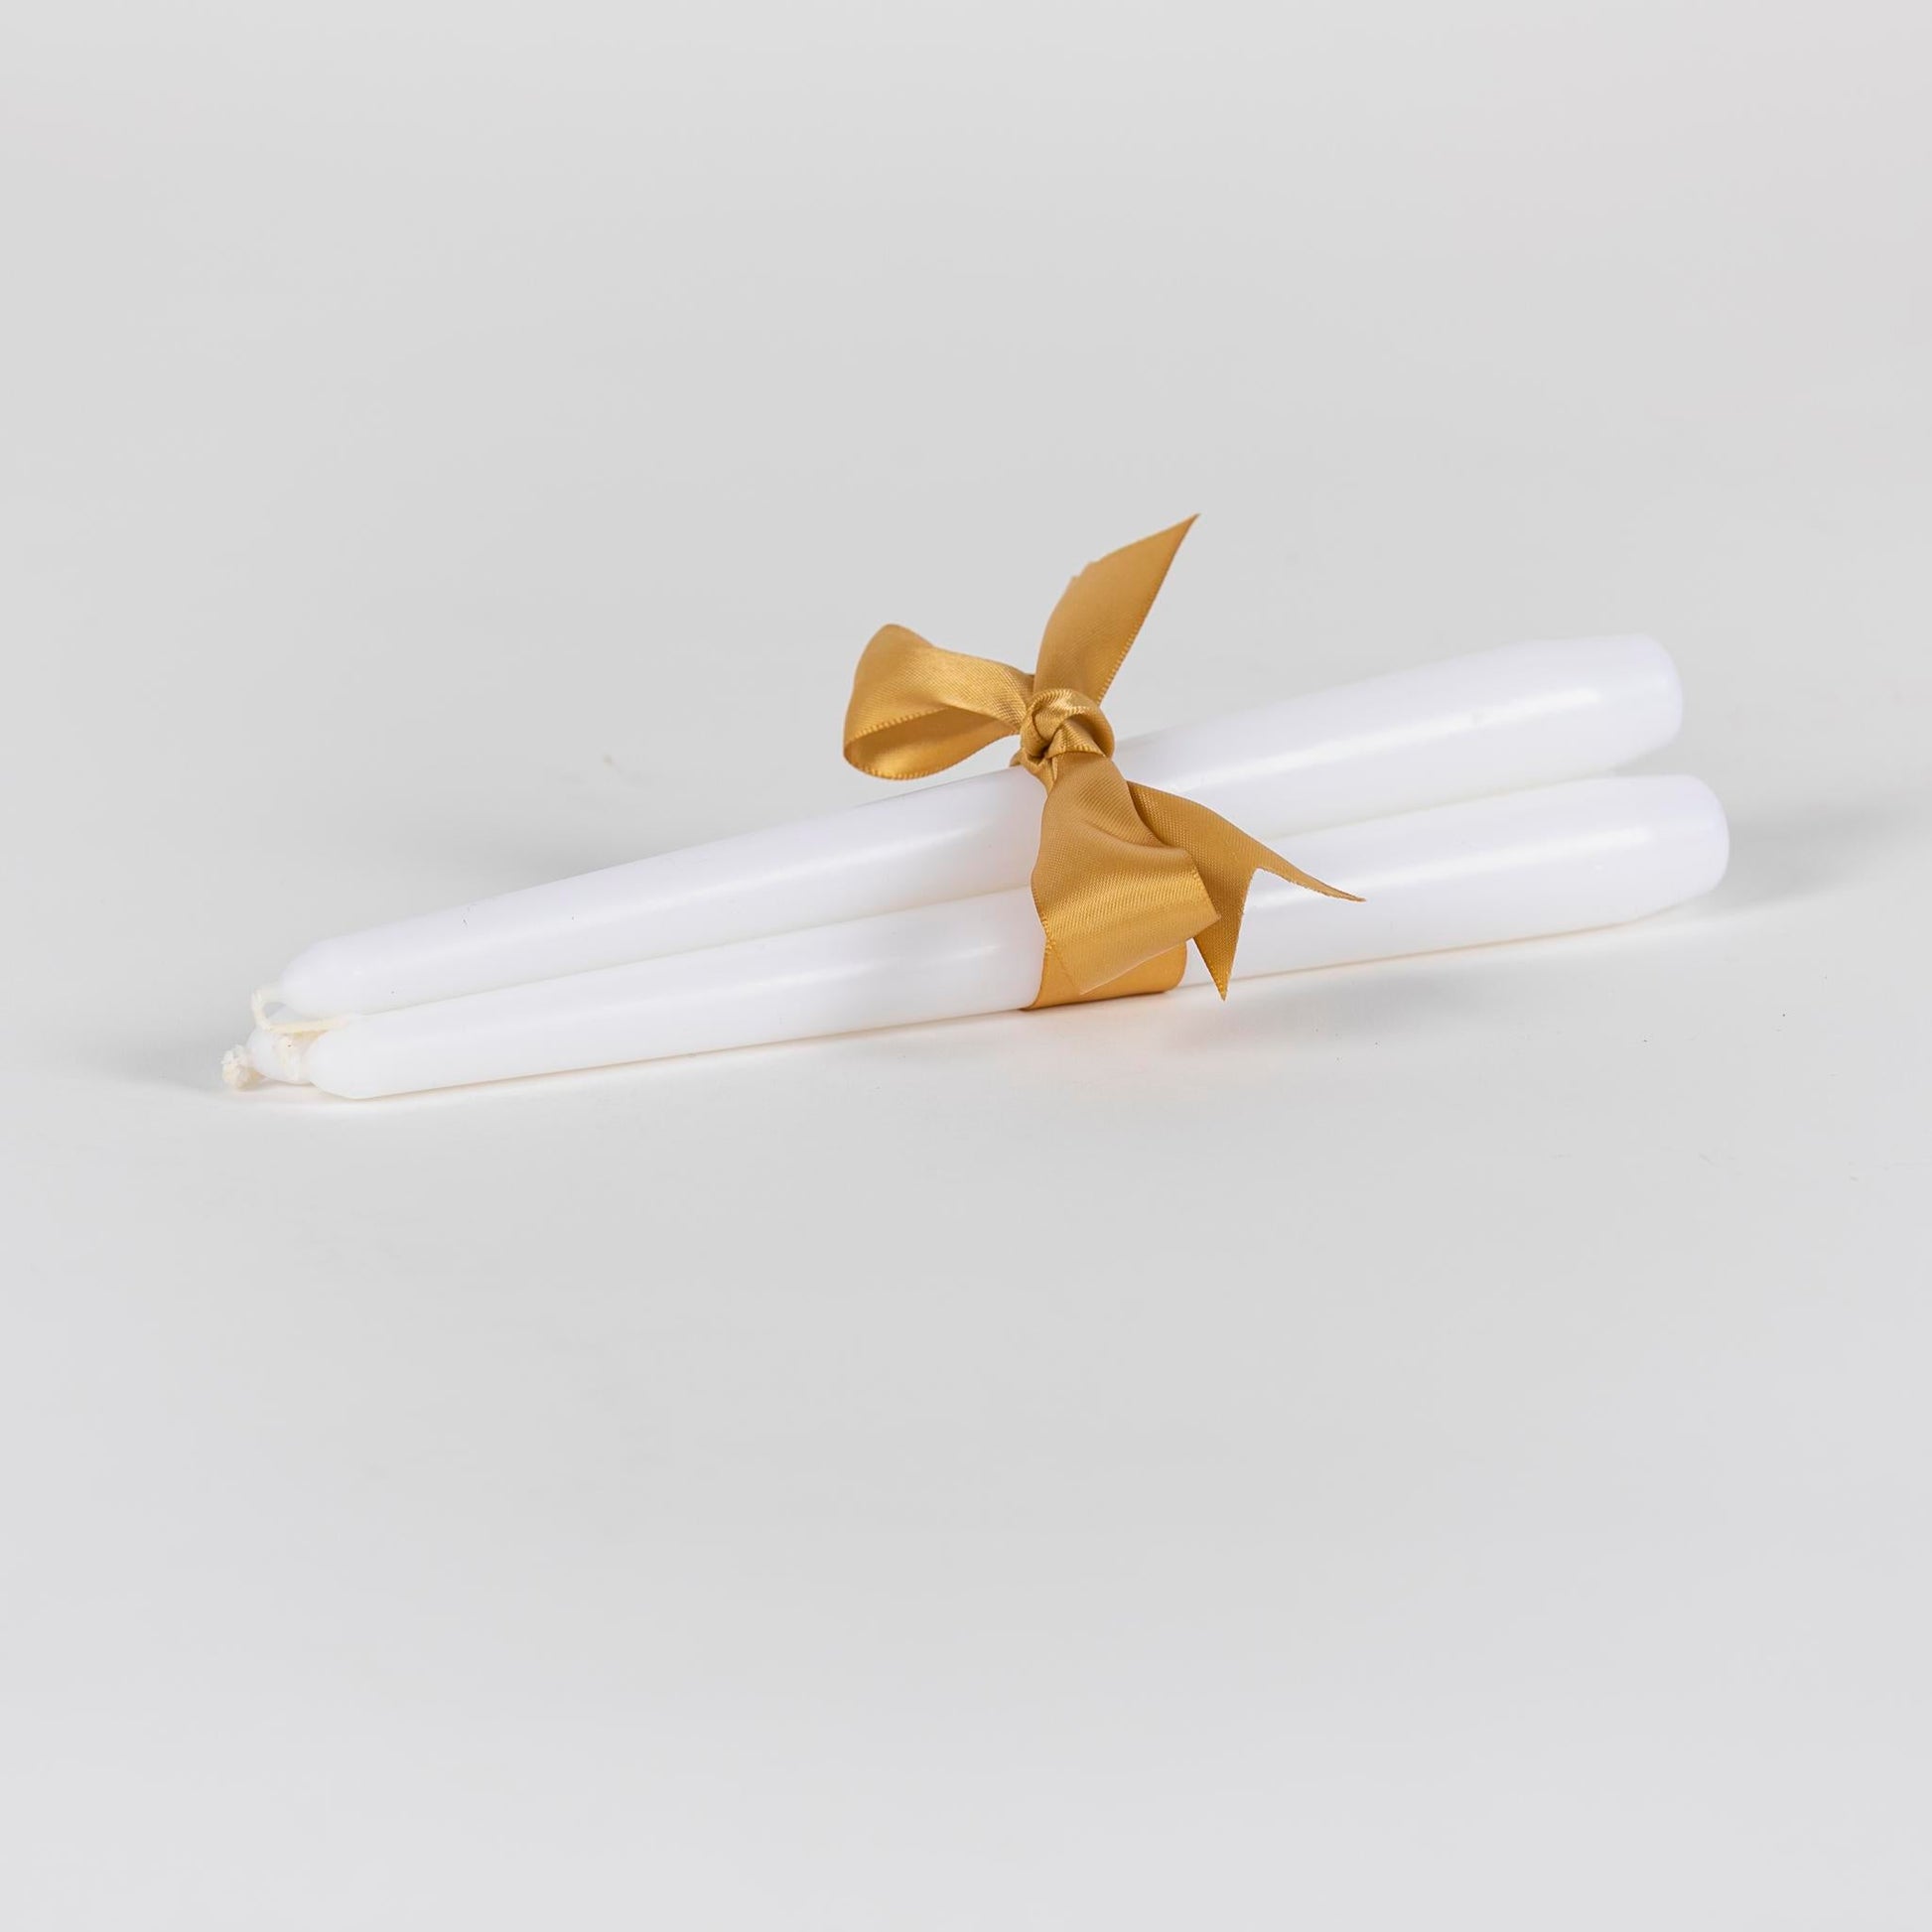 White Tapered Dinner Candles - Tableday